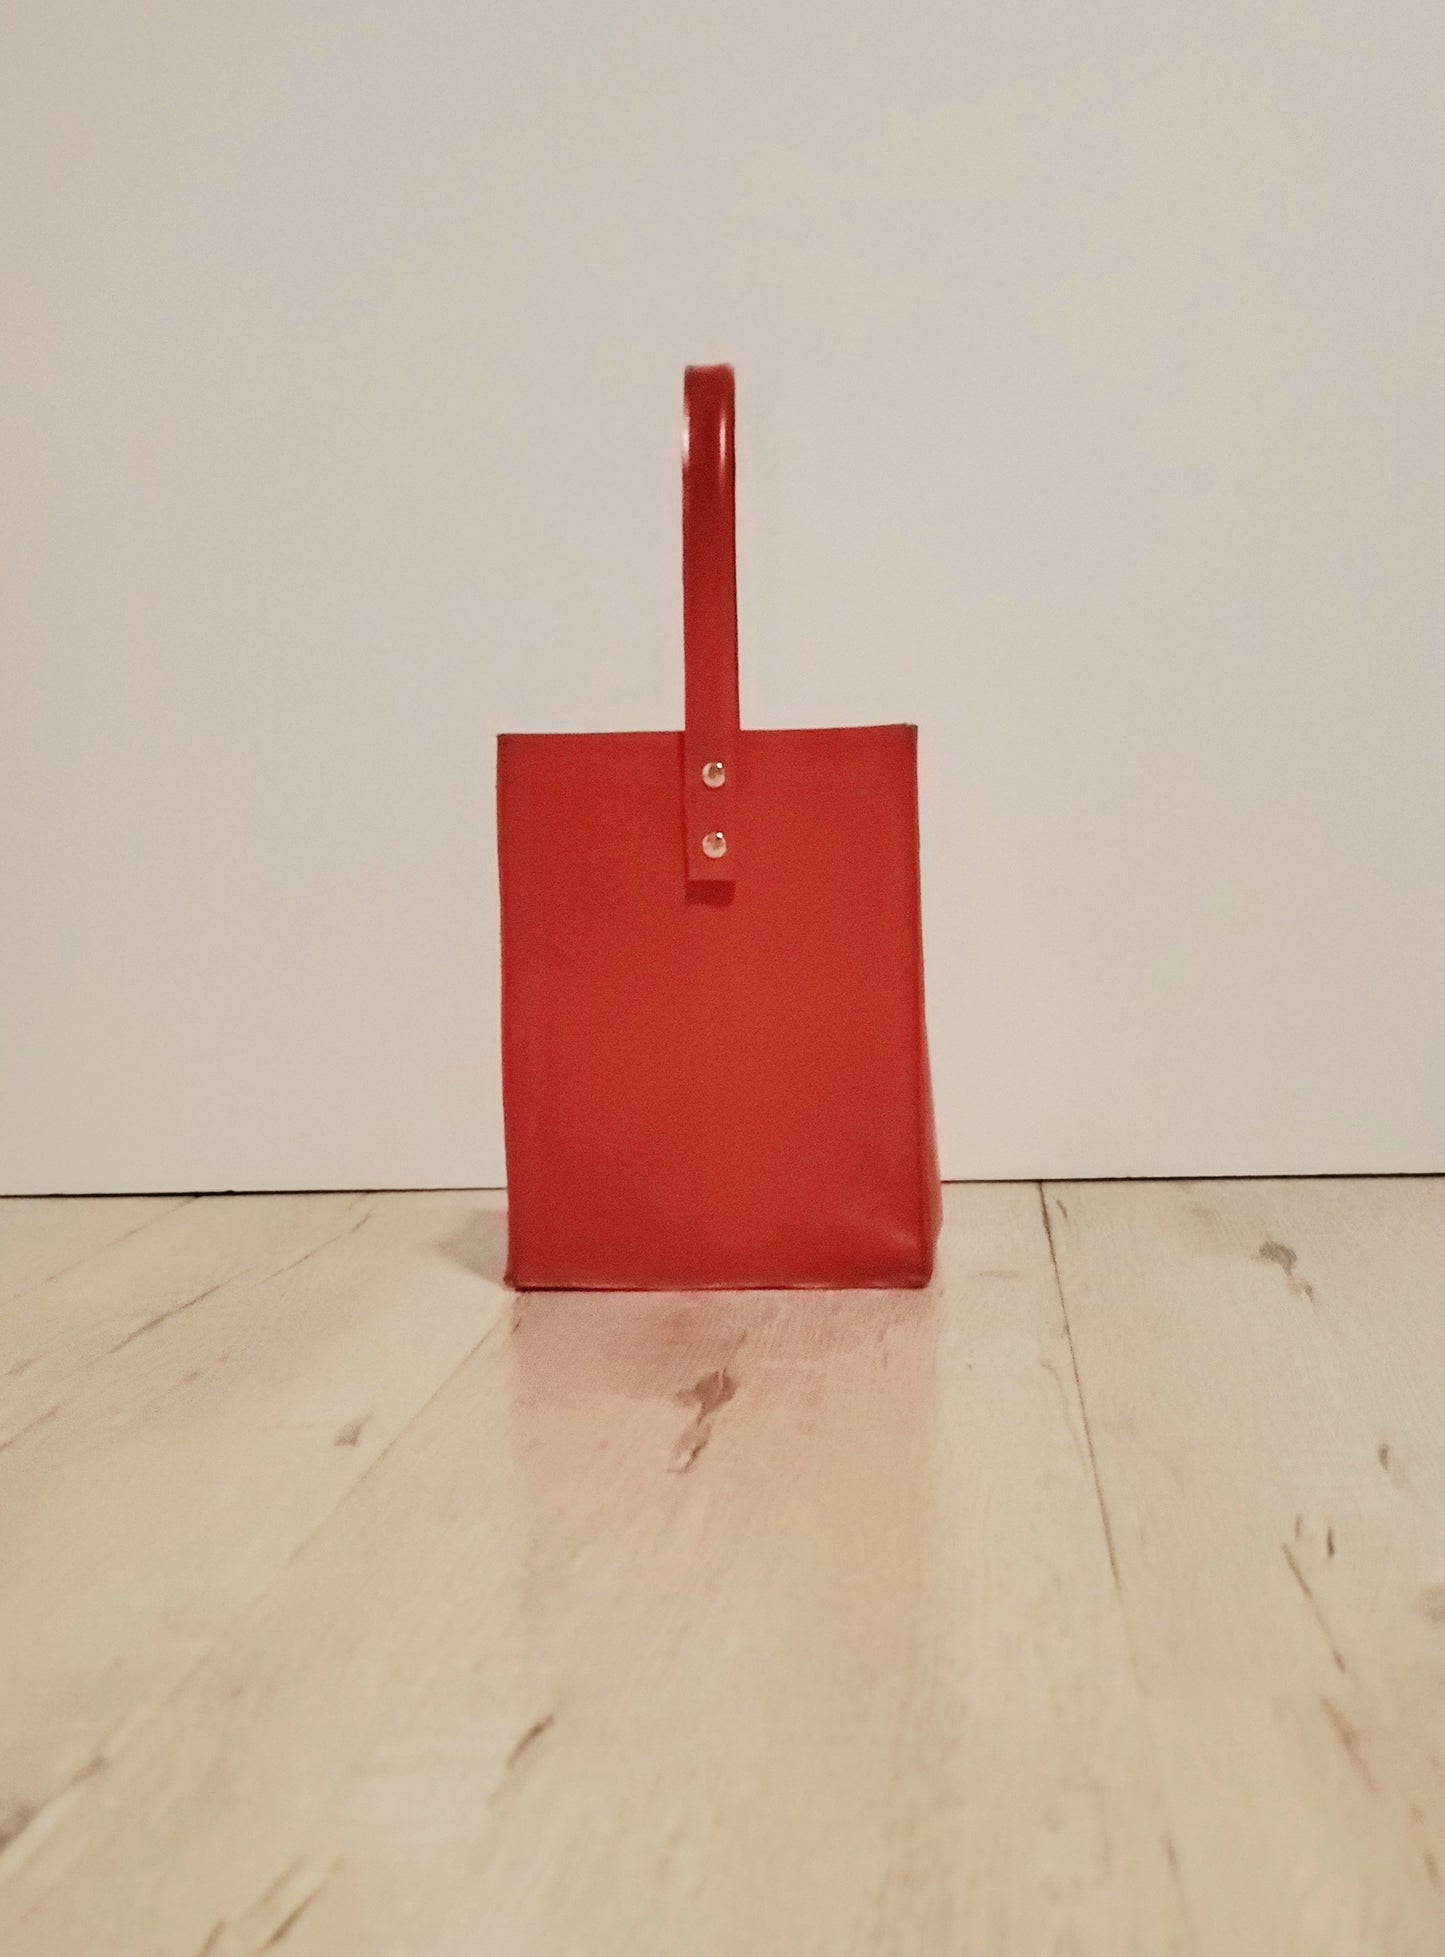 Red leather square bag with one handle